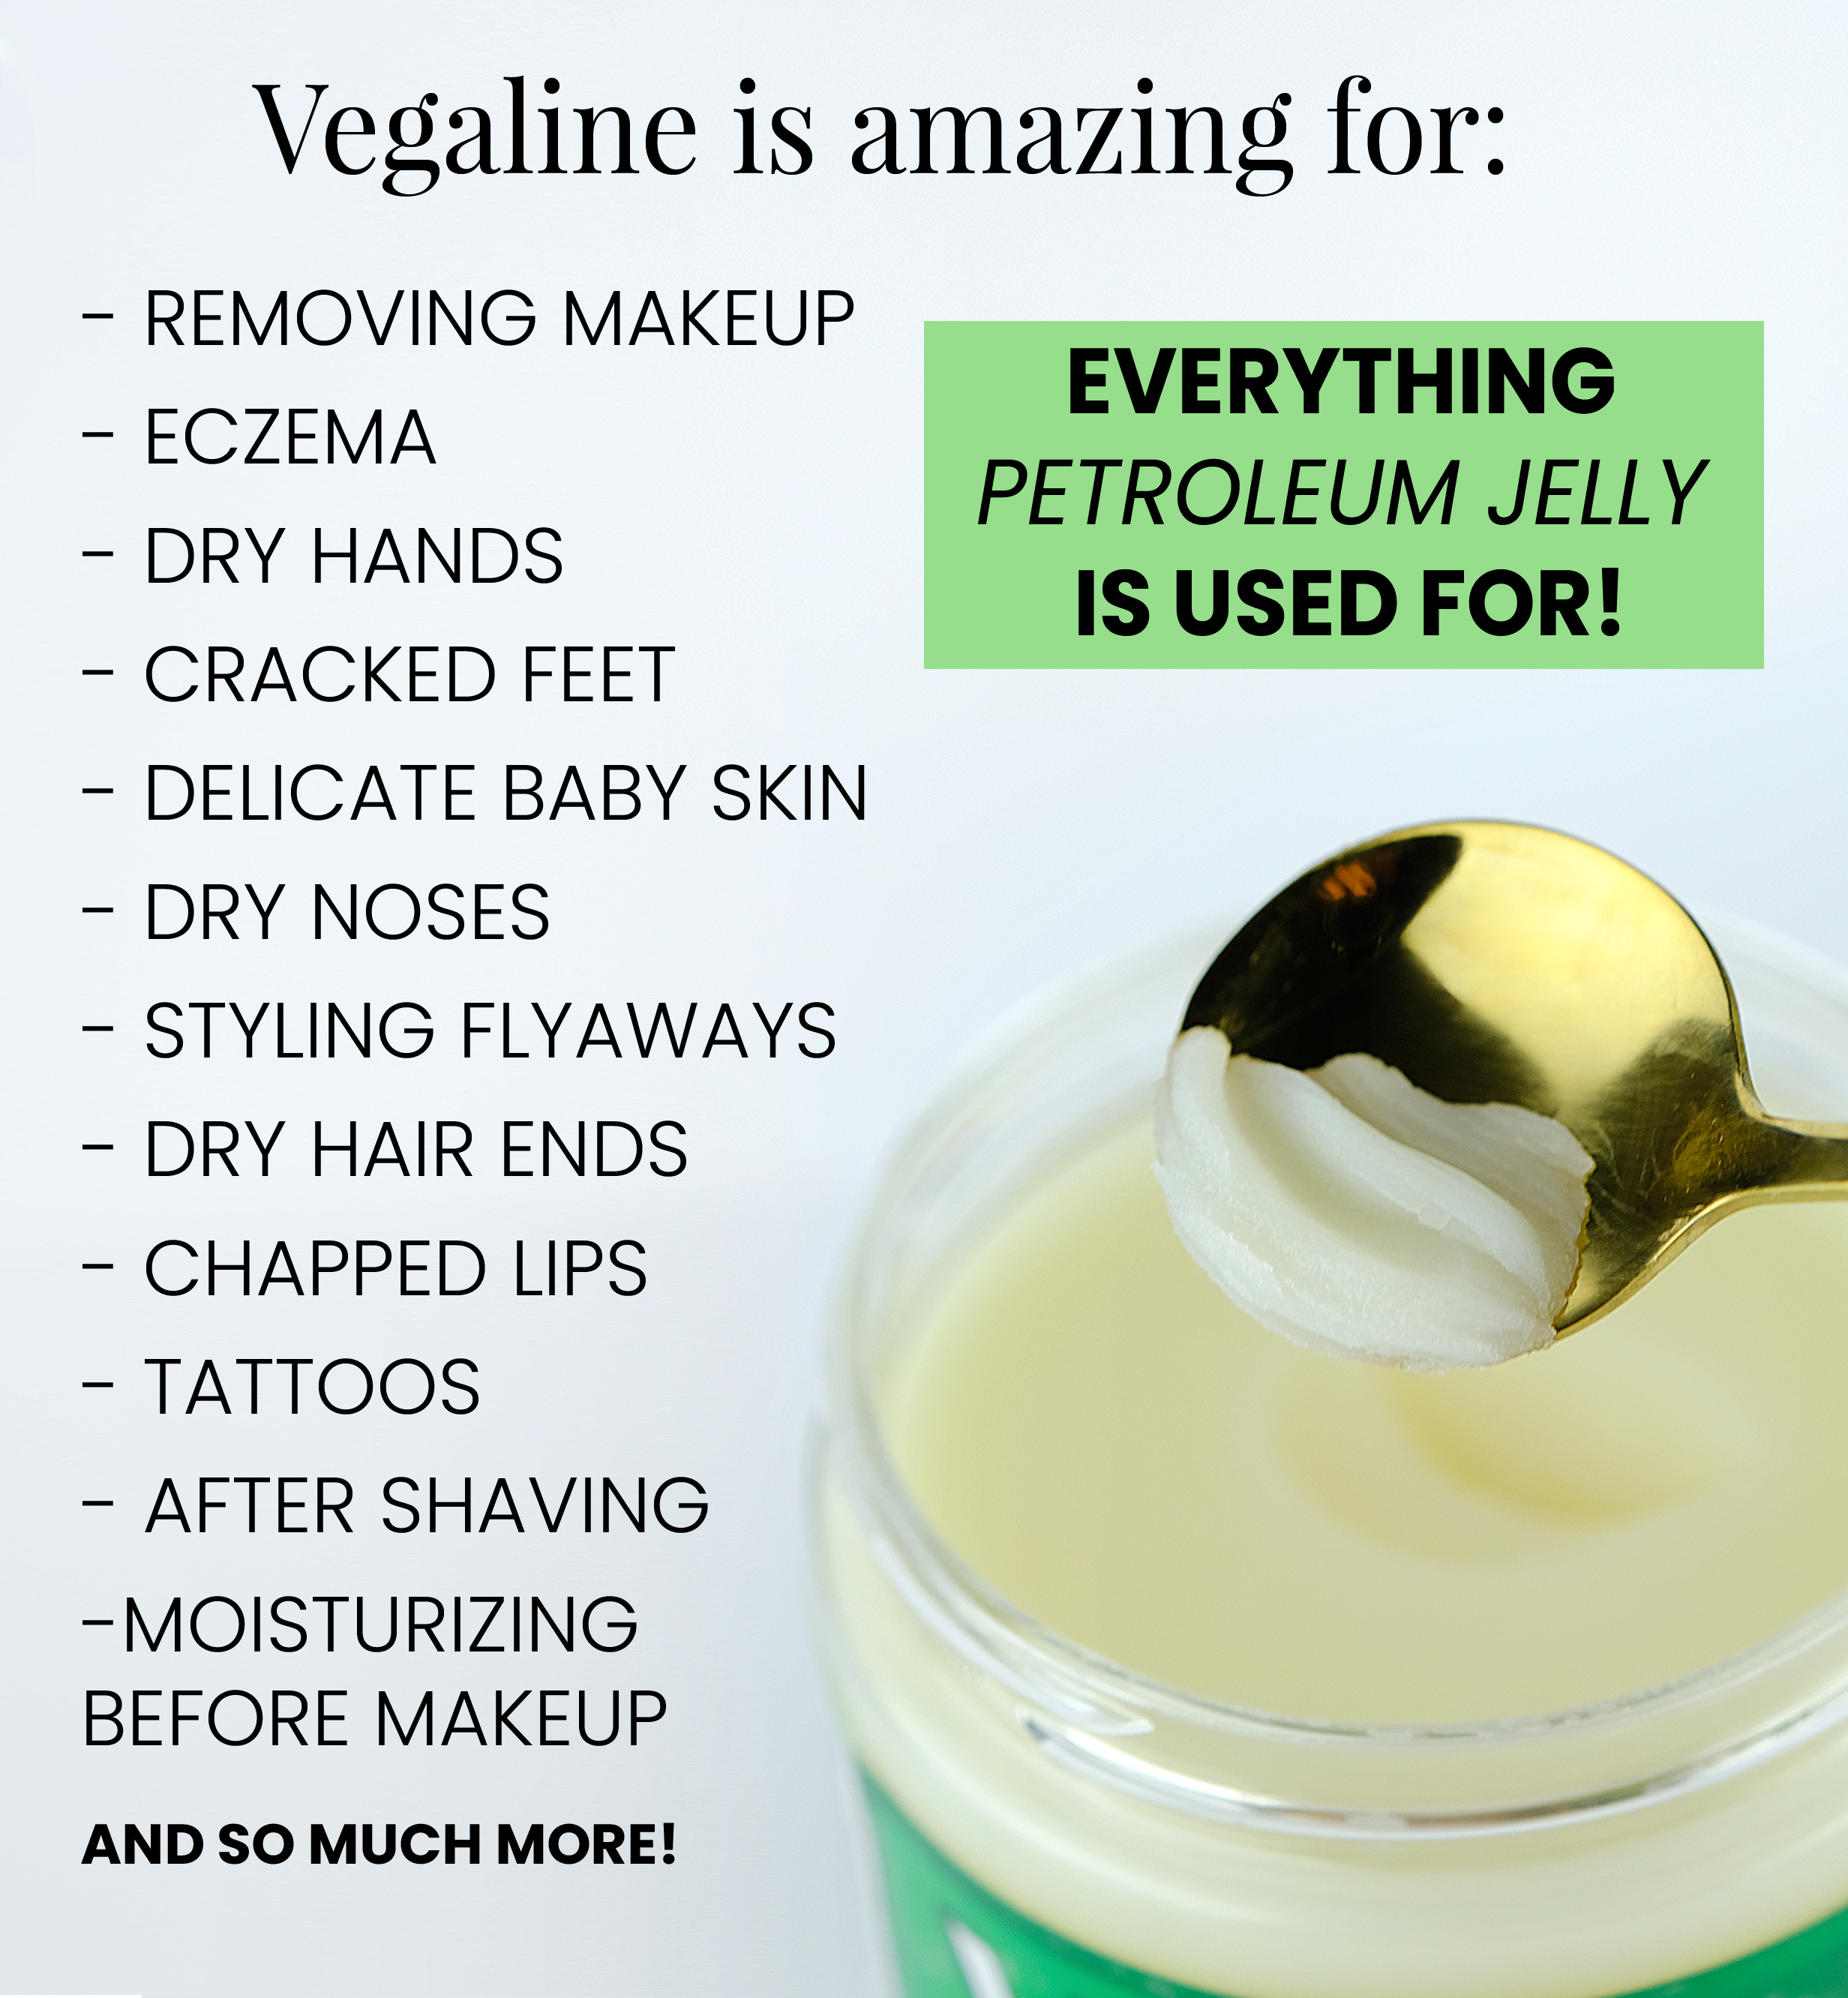 Vegaline - 100% Natural & Vegan Alternative to Petroleum Jelly - Hypoallergenic, Unscented, All-Purpose Moisturizer, Makeup Remover, Cruelty Free Hand & Foot Balm